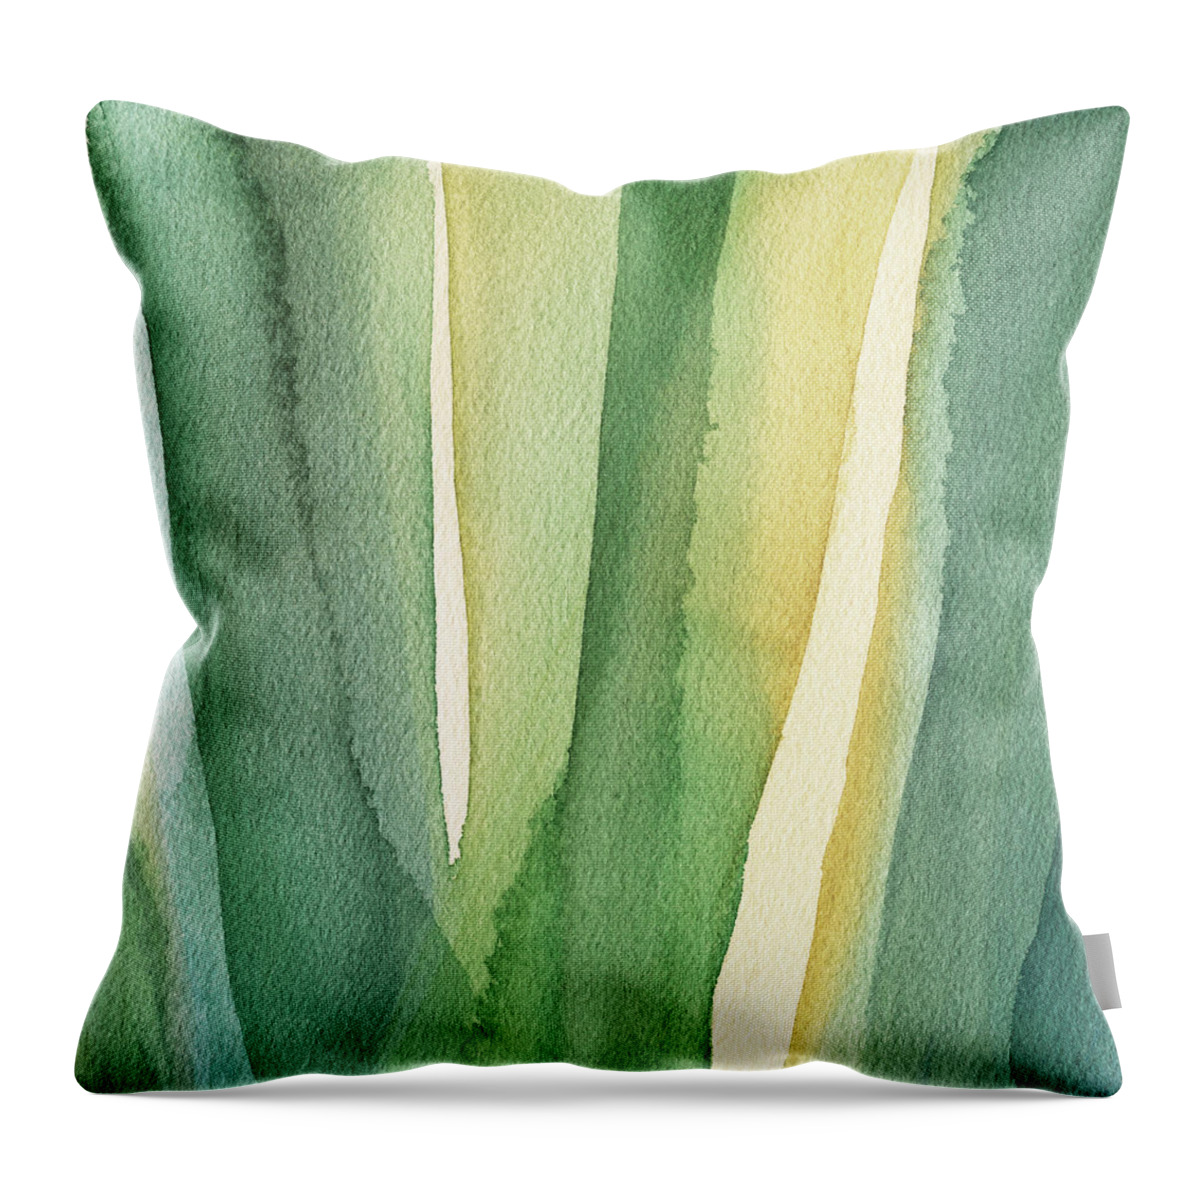 Green Throw Pillow featuring the painting Green Teal and Yellow Abstract by Beverly Brown Prints